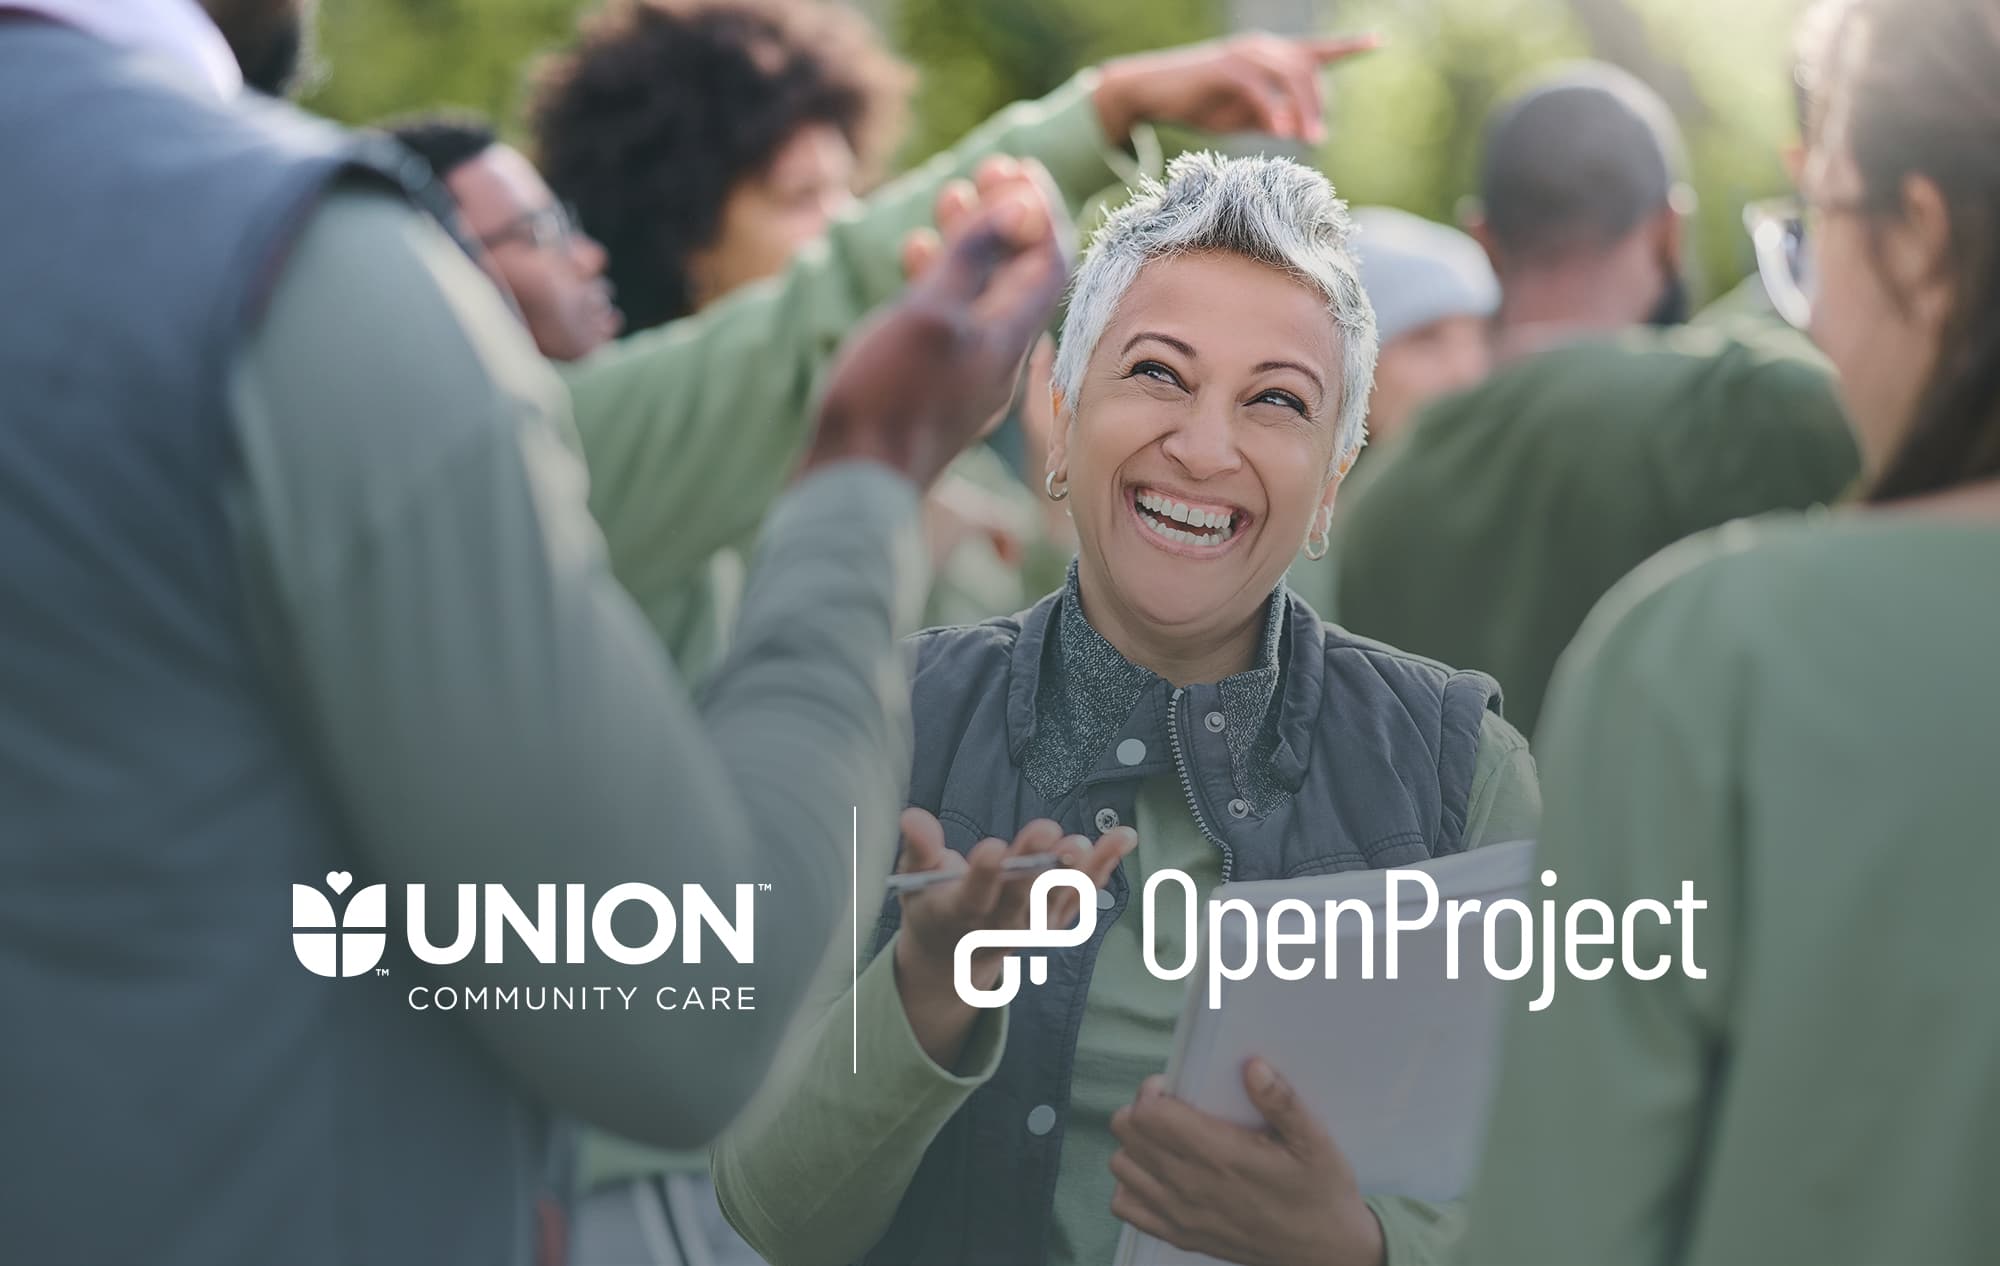 Union Community Care finds technical and cultural alignment with OpenProject